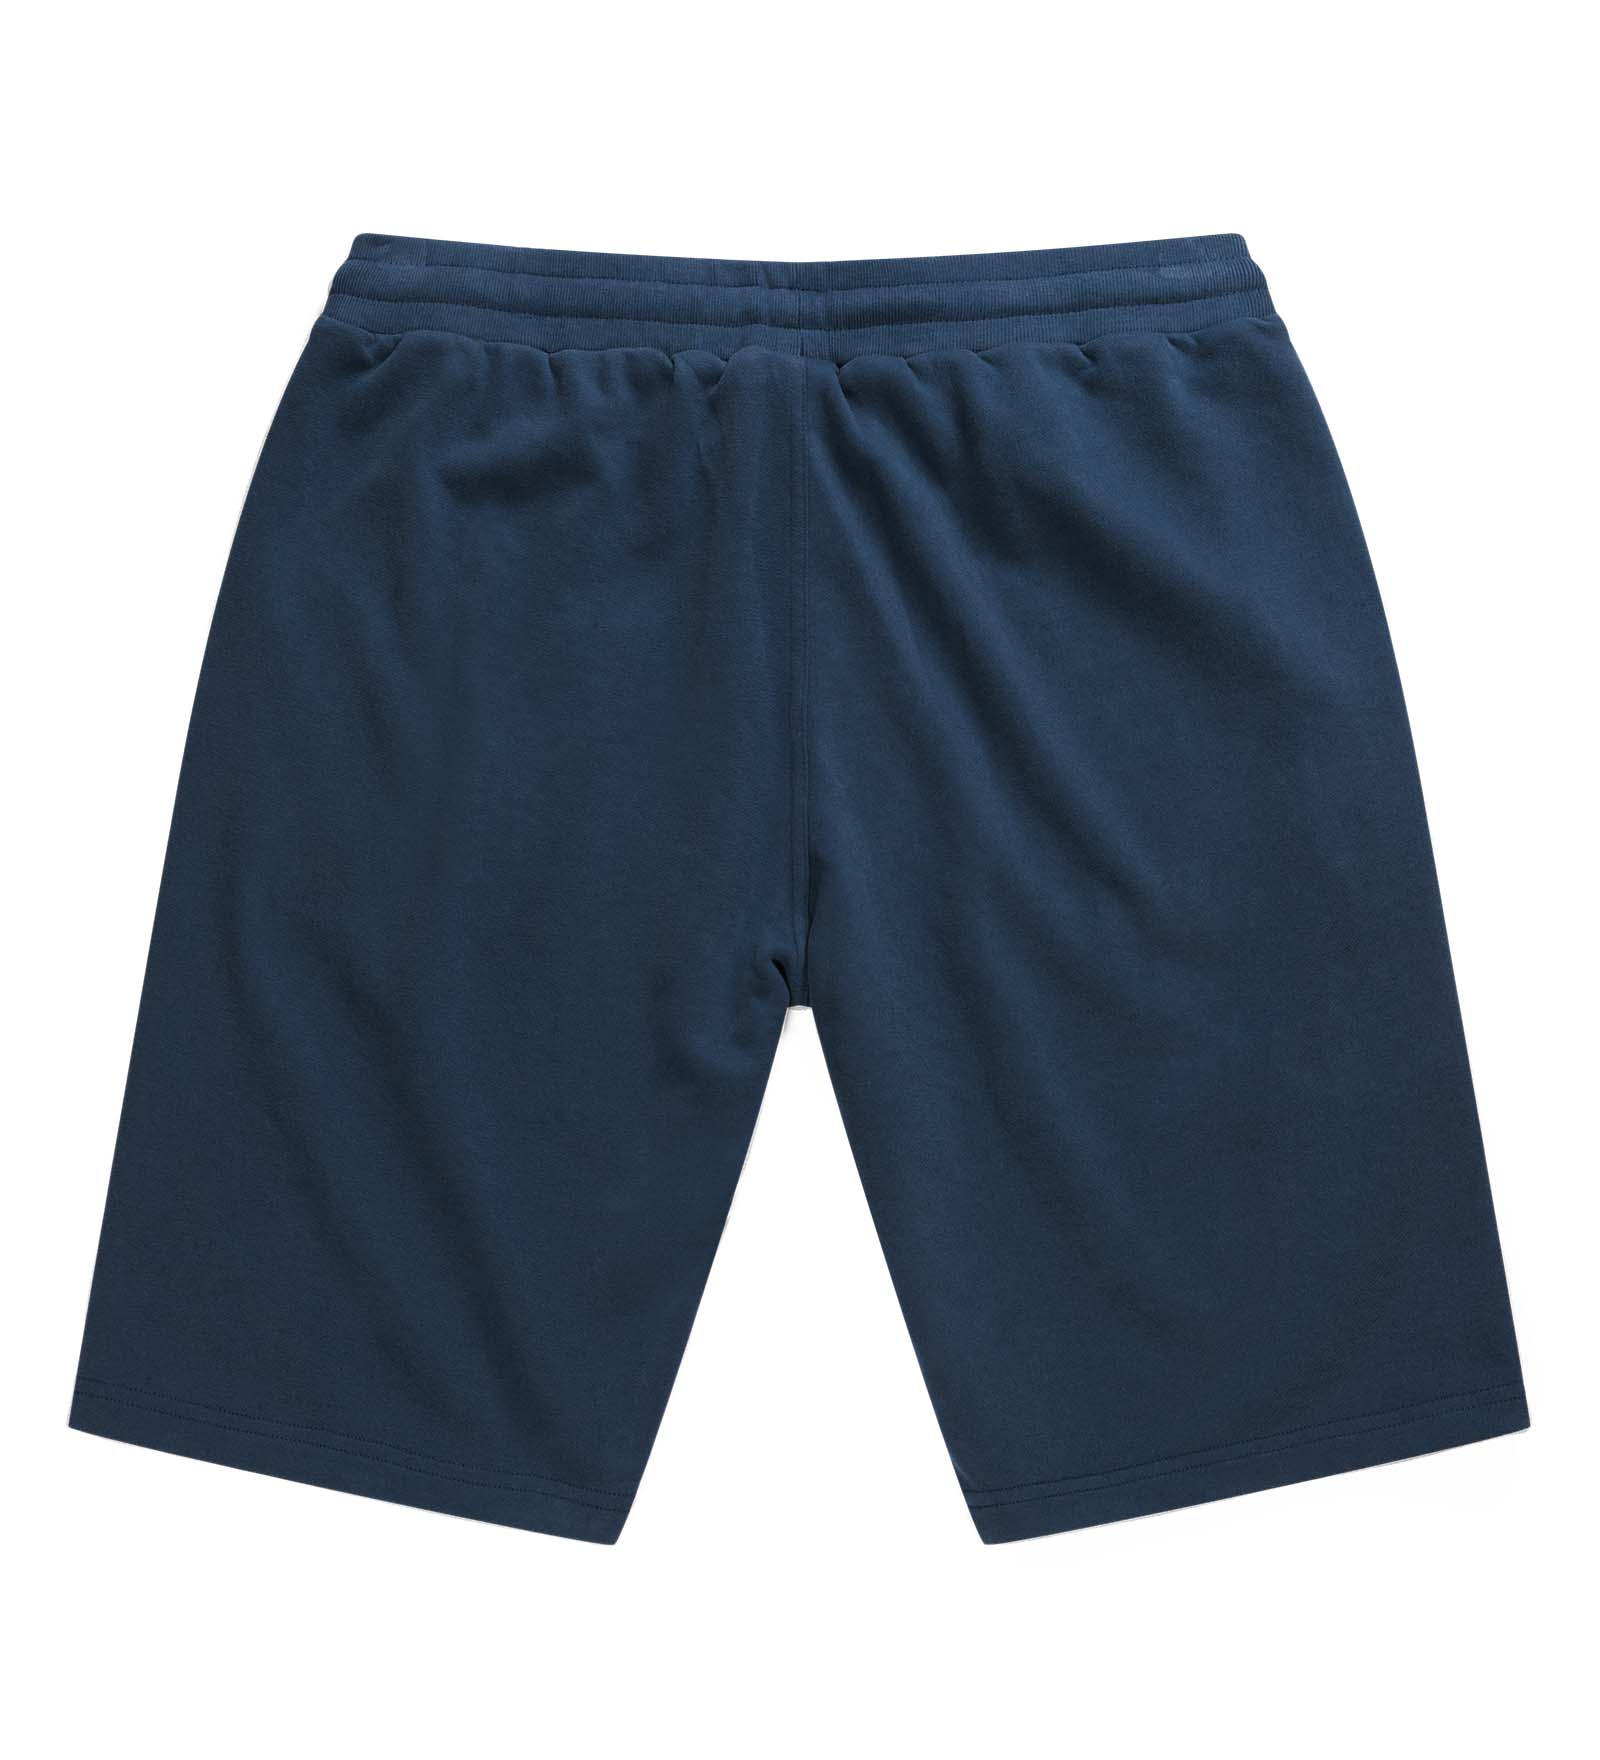 Sweat Shorts Navy Blue for Men and Women 